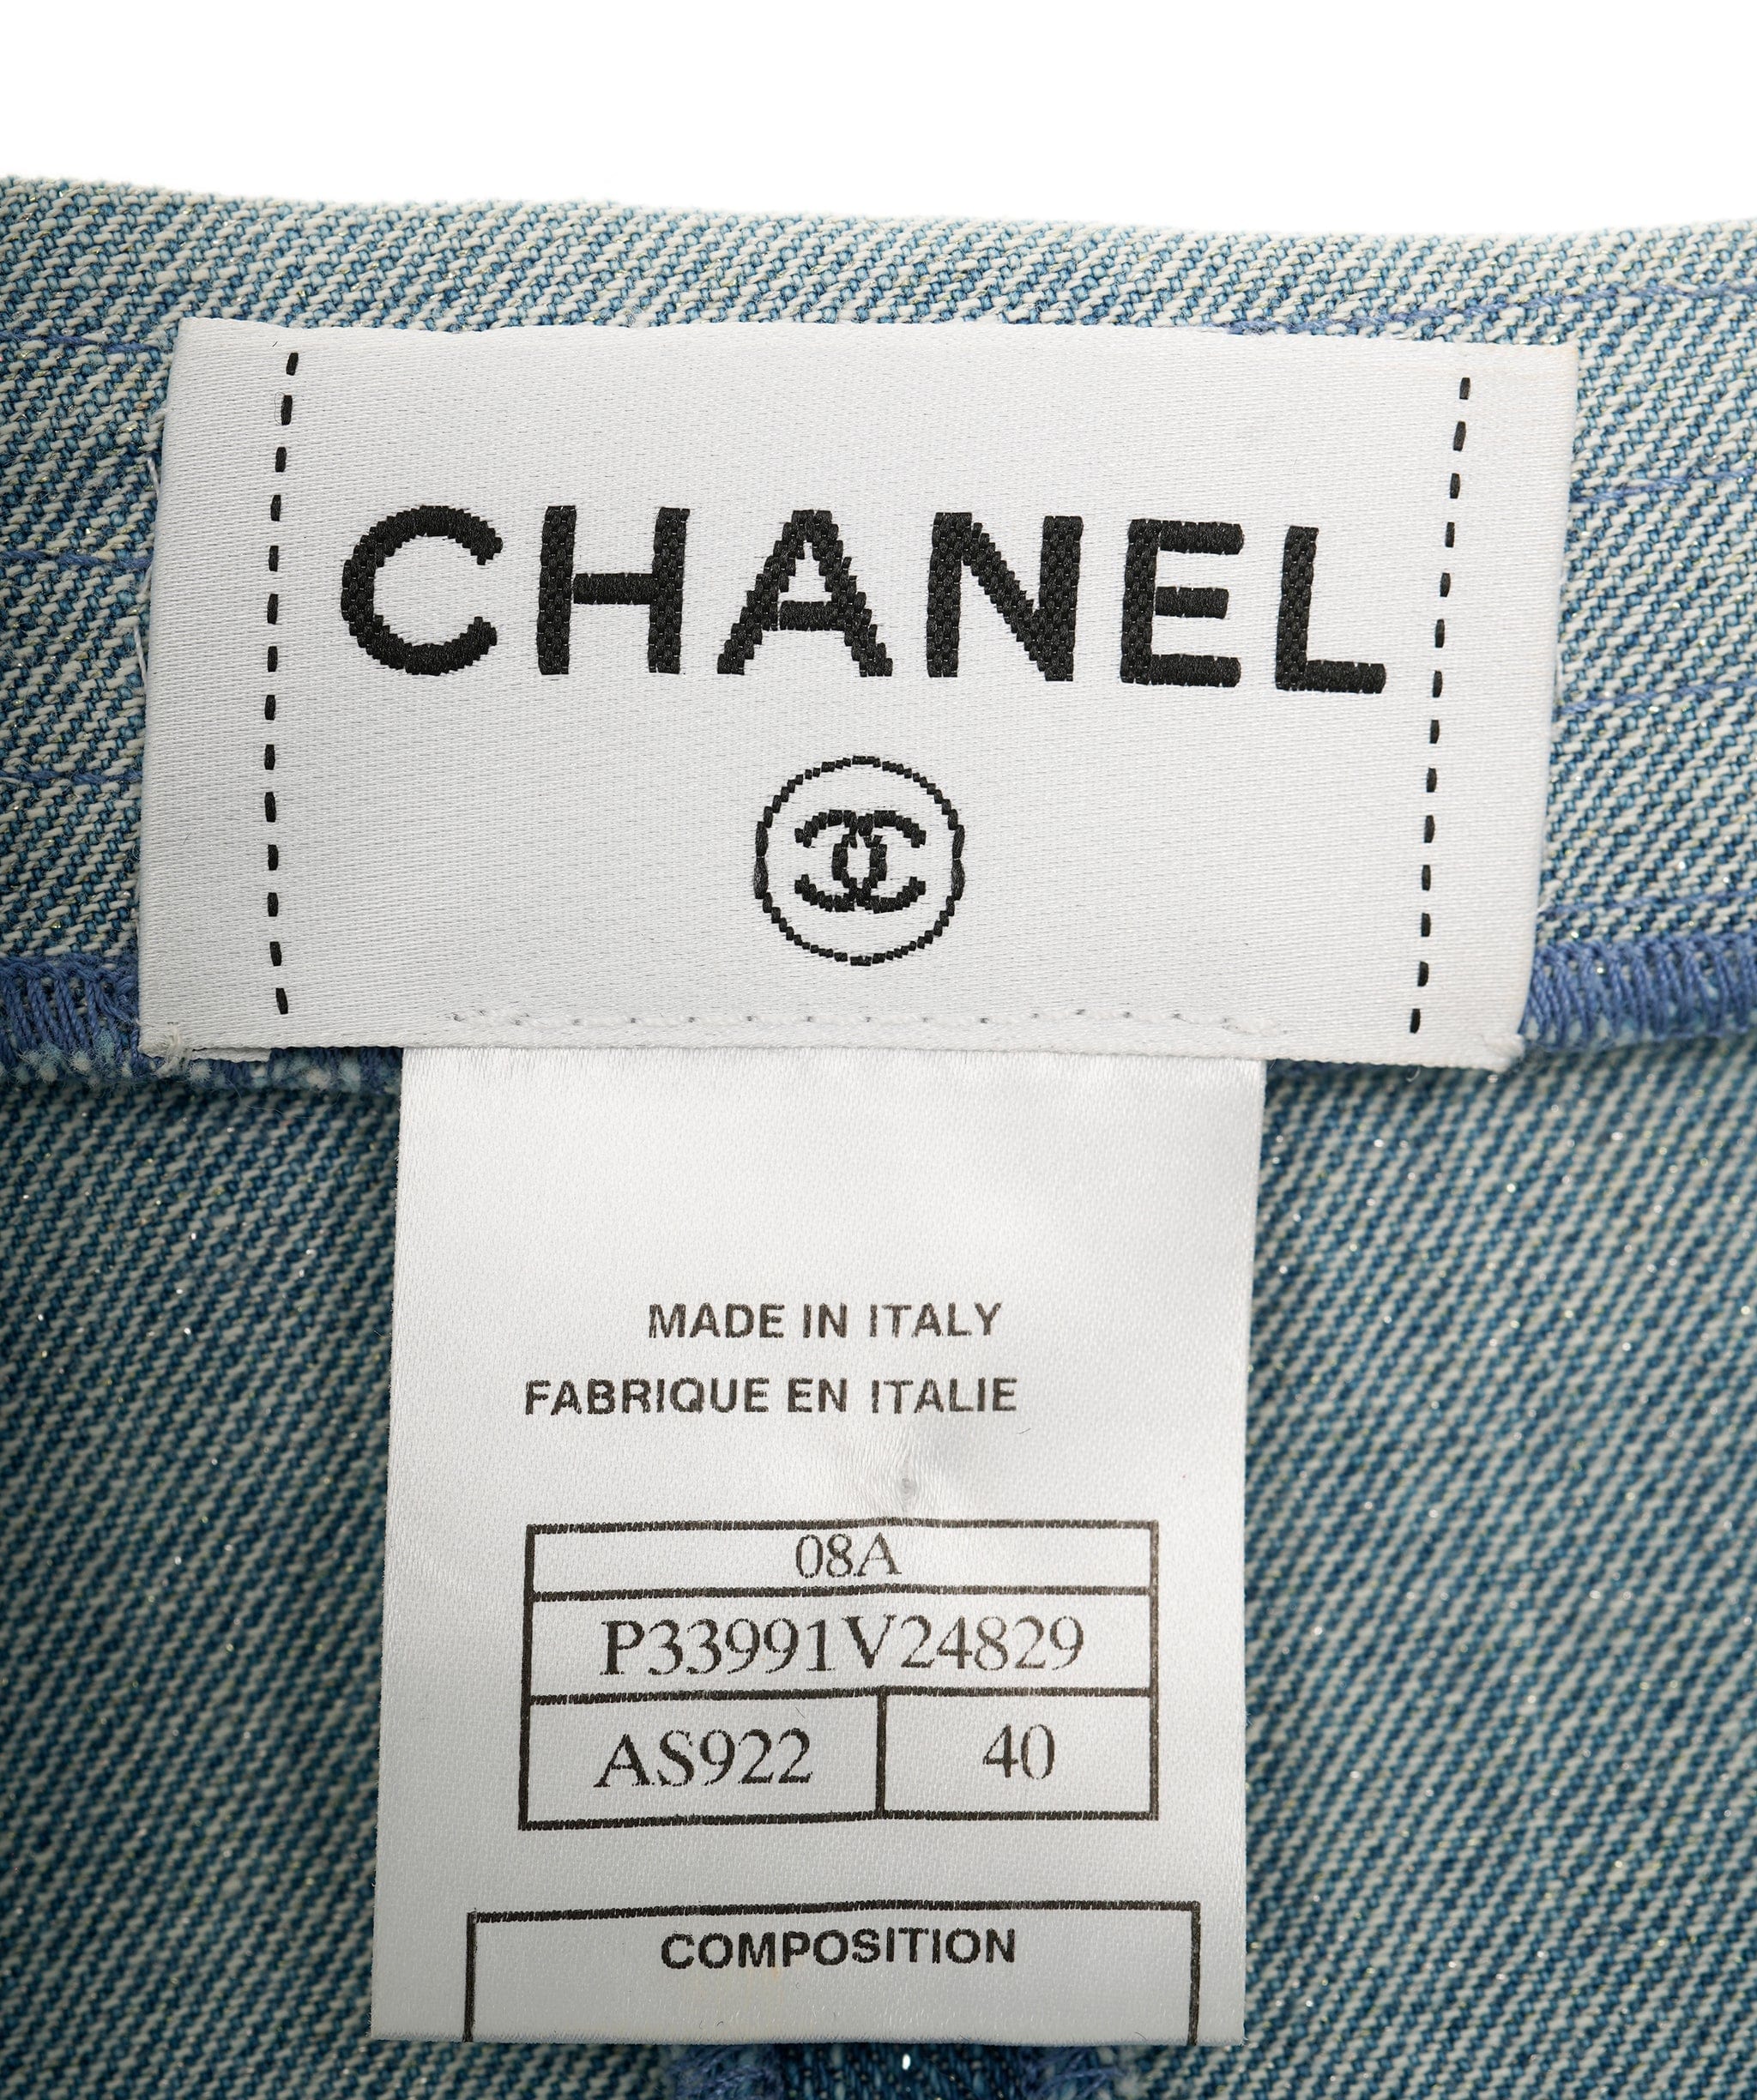 Chanel Chanel Denim Distressed Pinafore Dress with Zip Detail Size FR 40 (UK 12) ASL9296